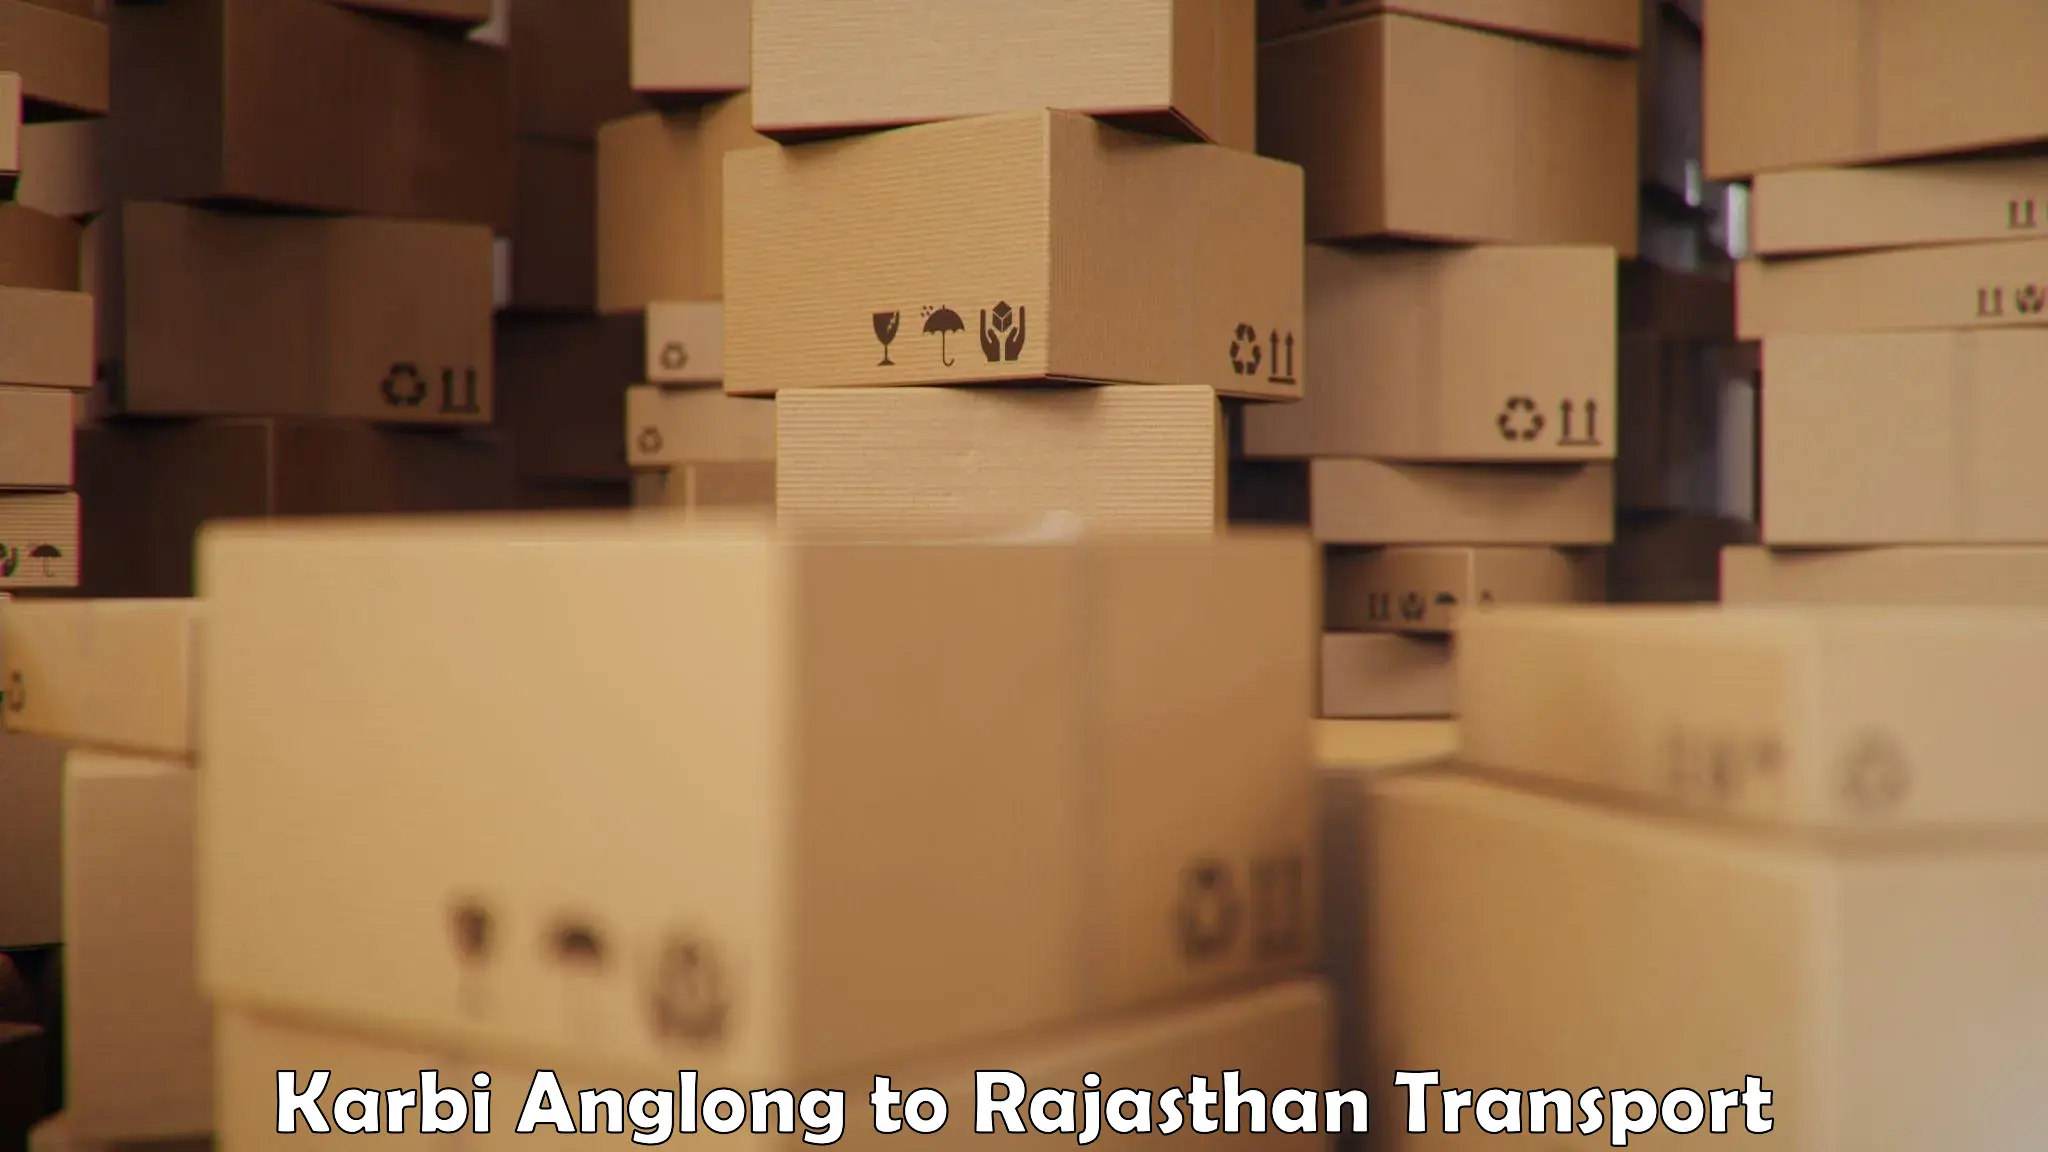 Cargo train transport services Karbi Anglong to Rajasthan